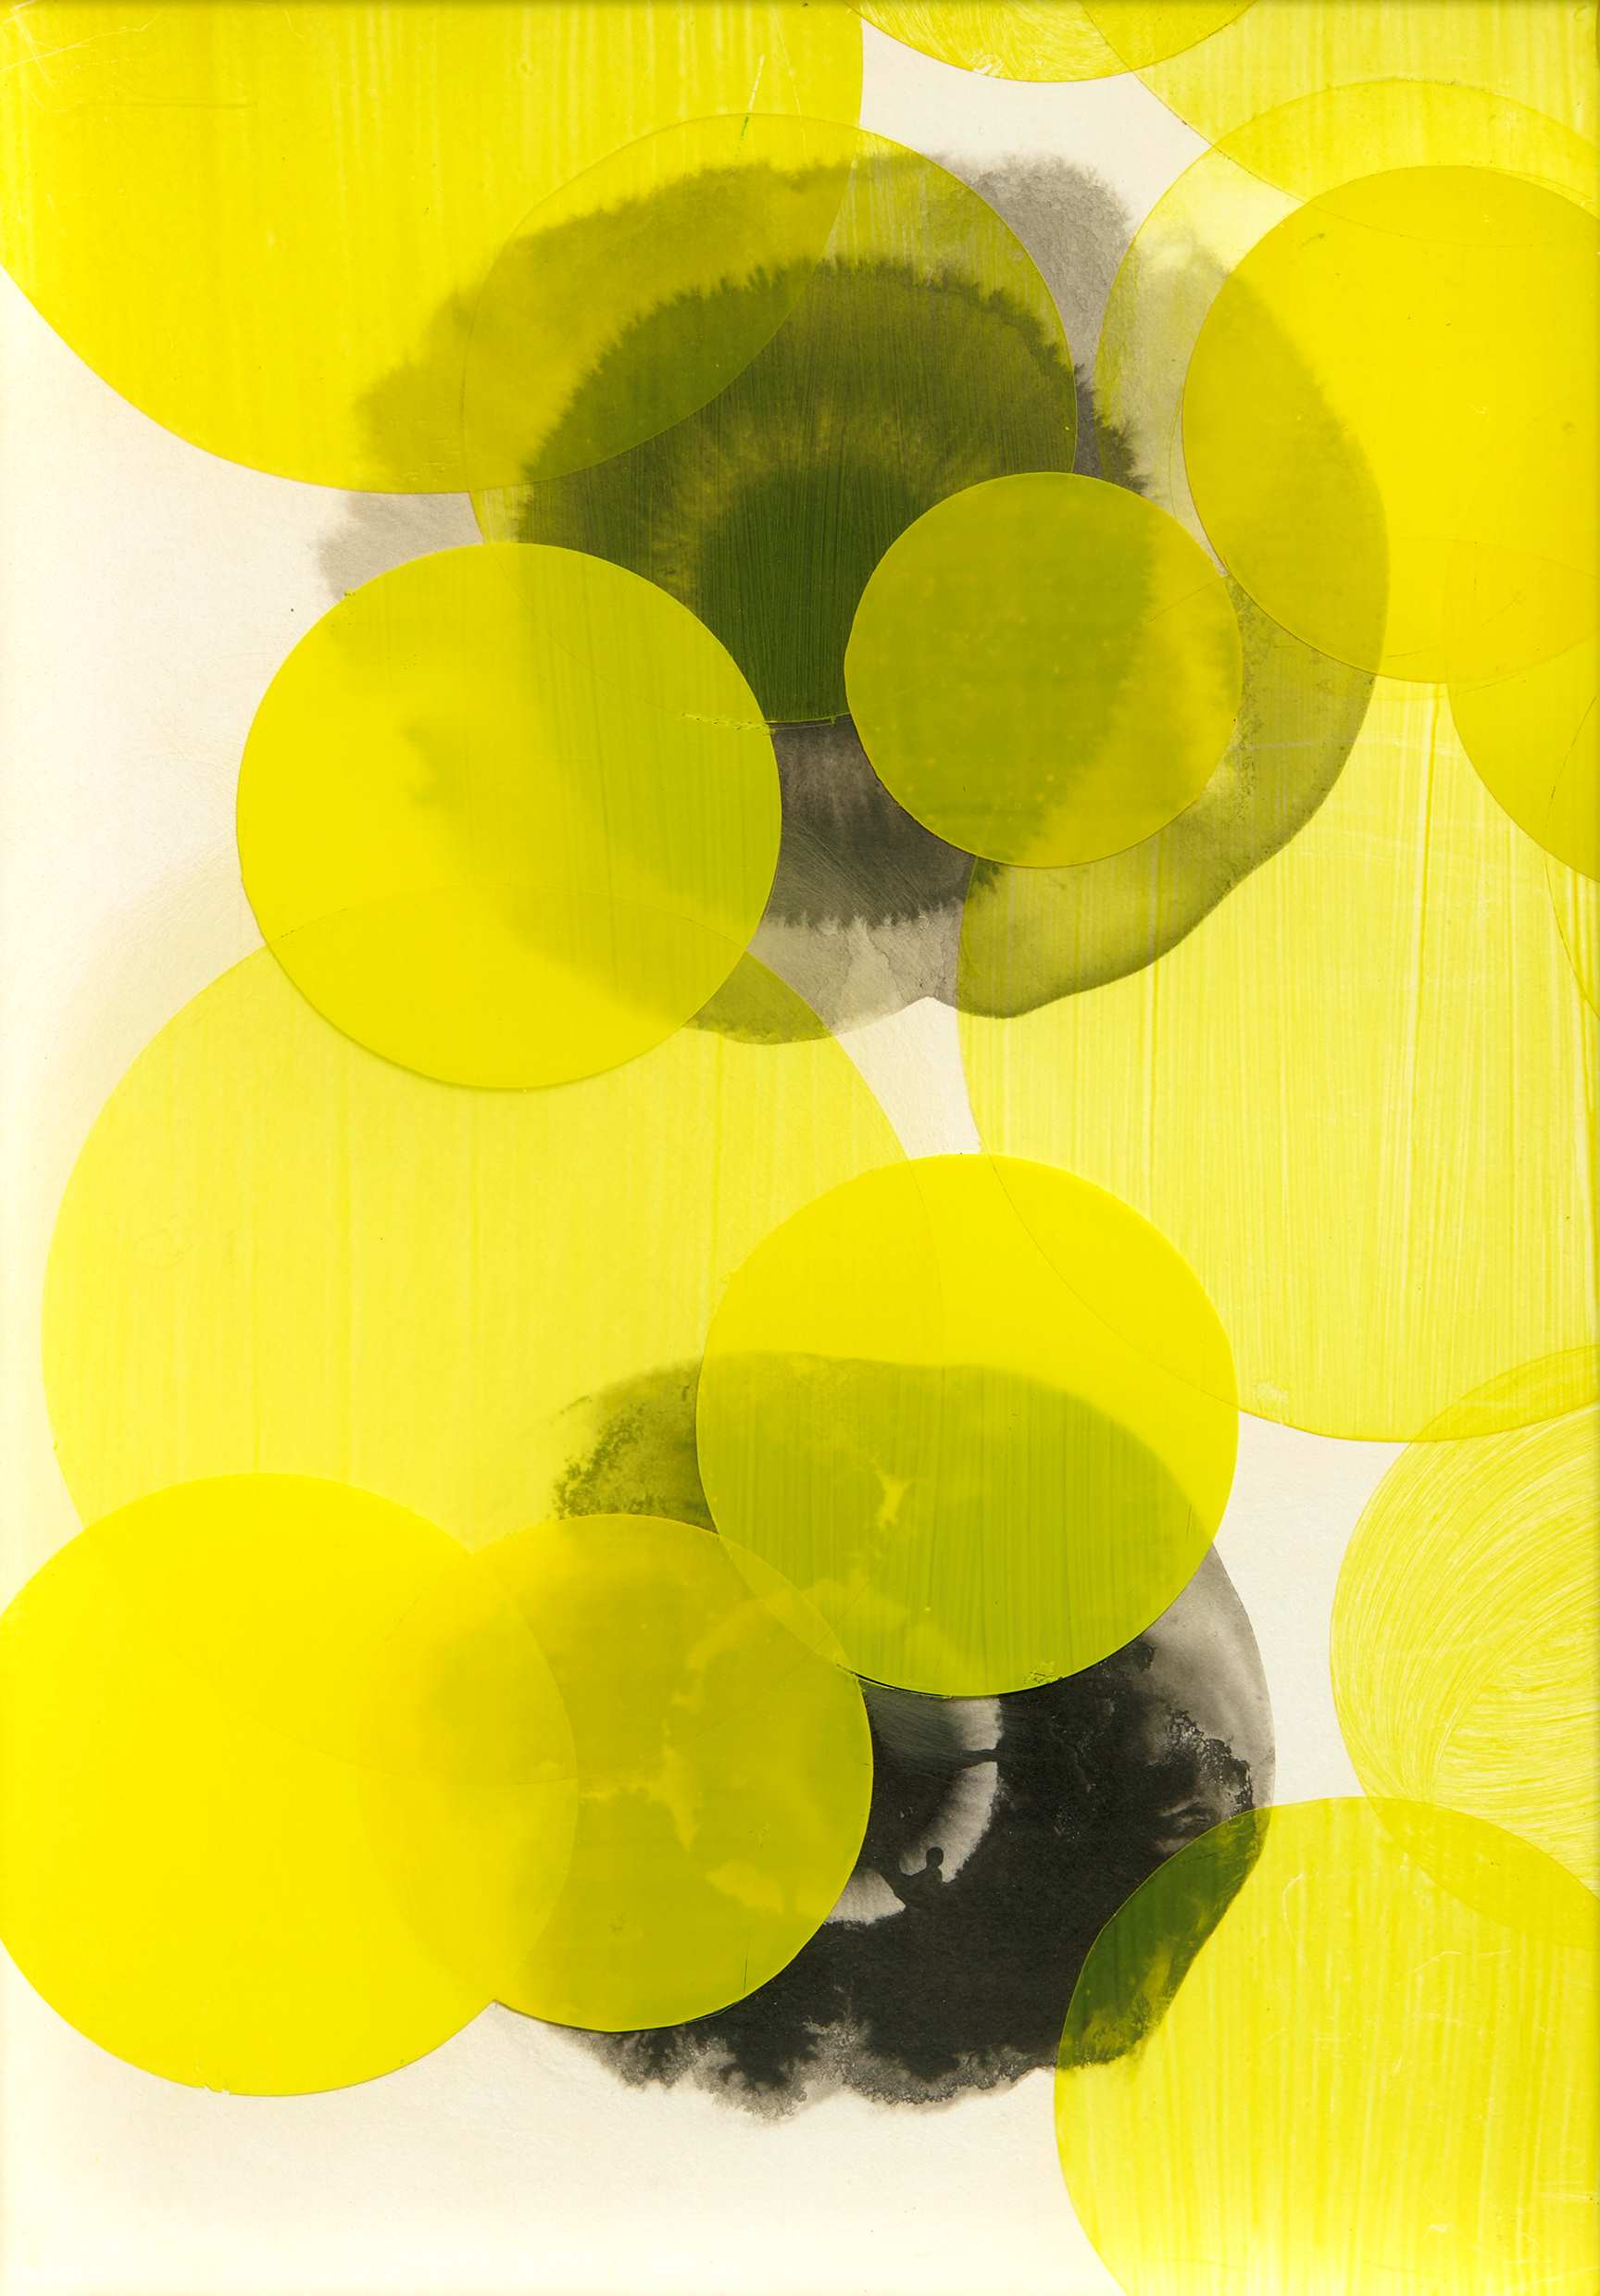 Mark Hislop 'Yellow vision 1' ink on paper, synthetic polymer paint on acrylic sheet 48 x 34 cm $2,000